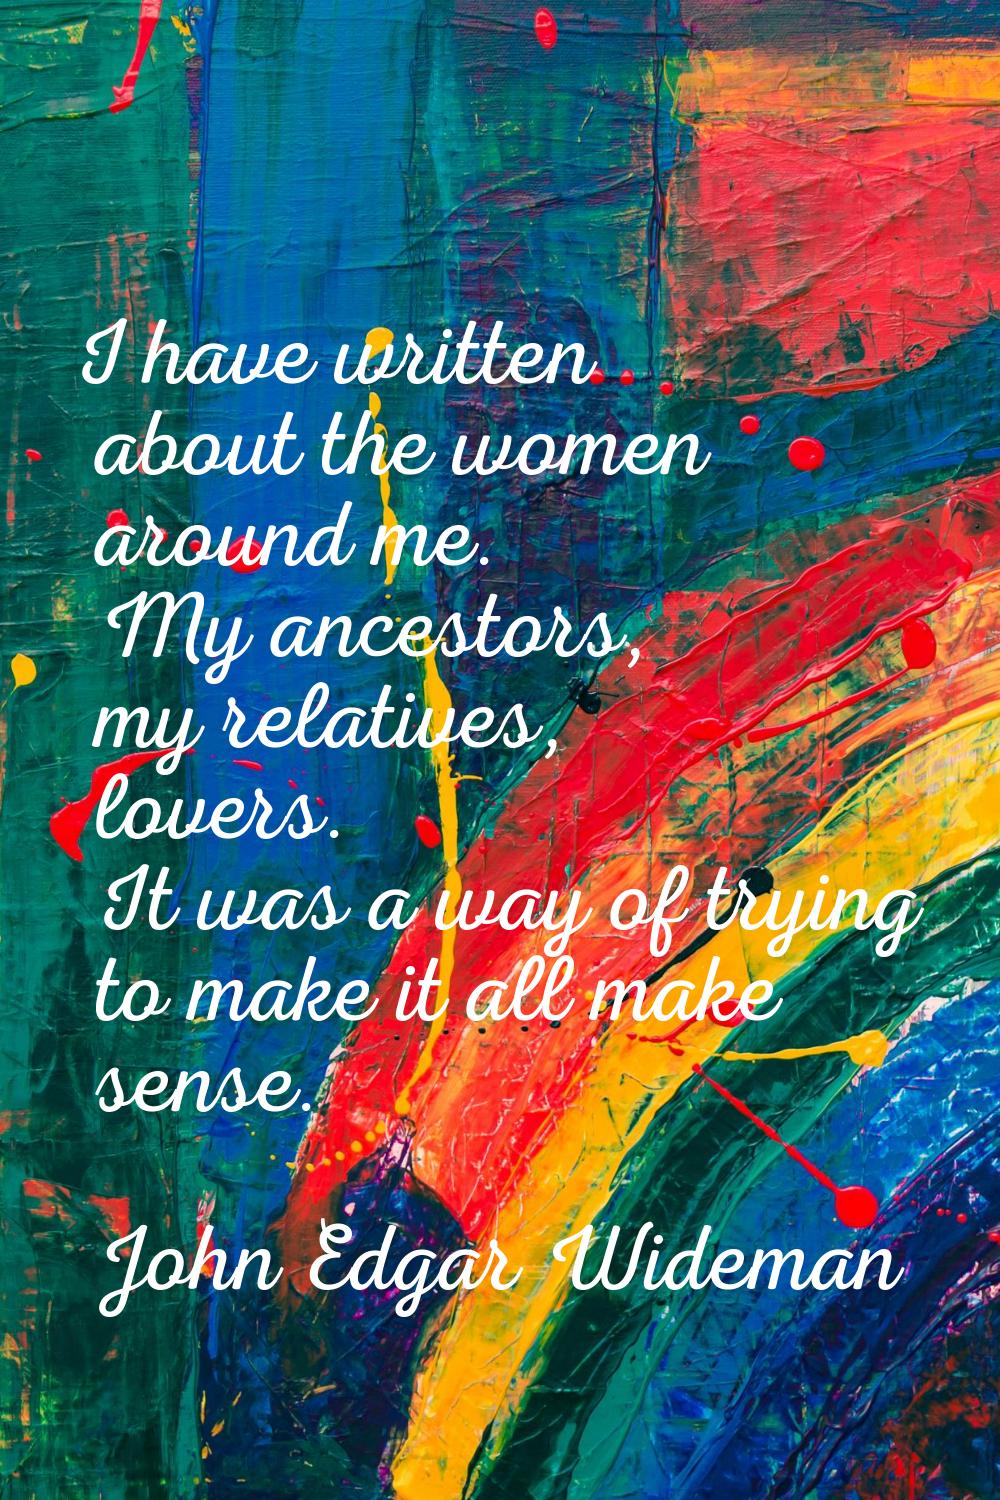 I have written about the women around me. My ancestors, my relatives, lovers. It was a way of tryin